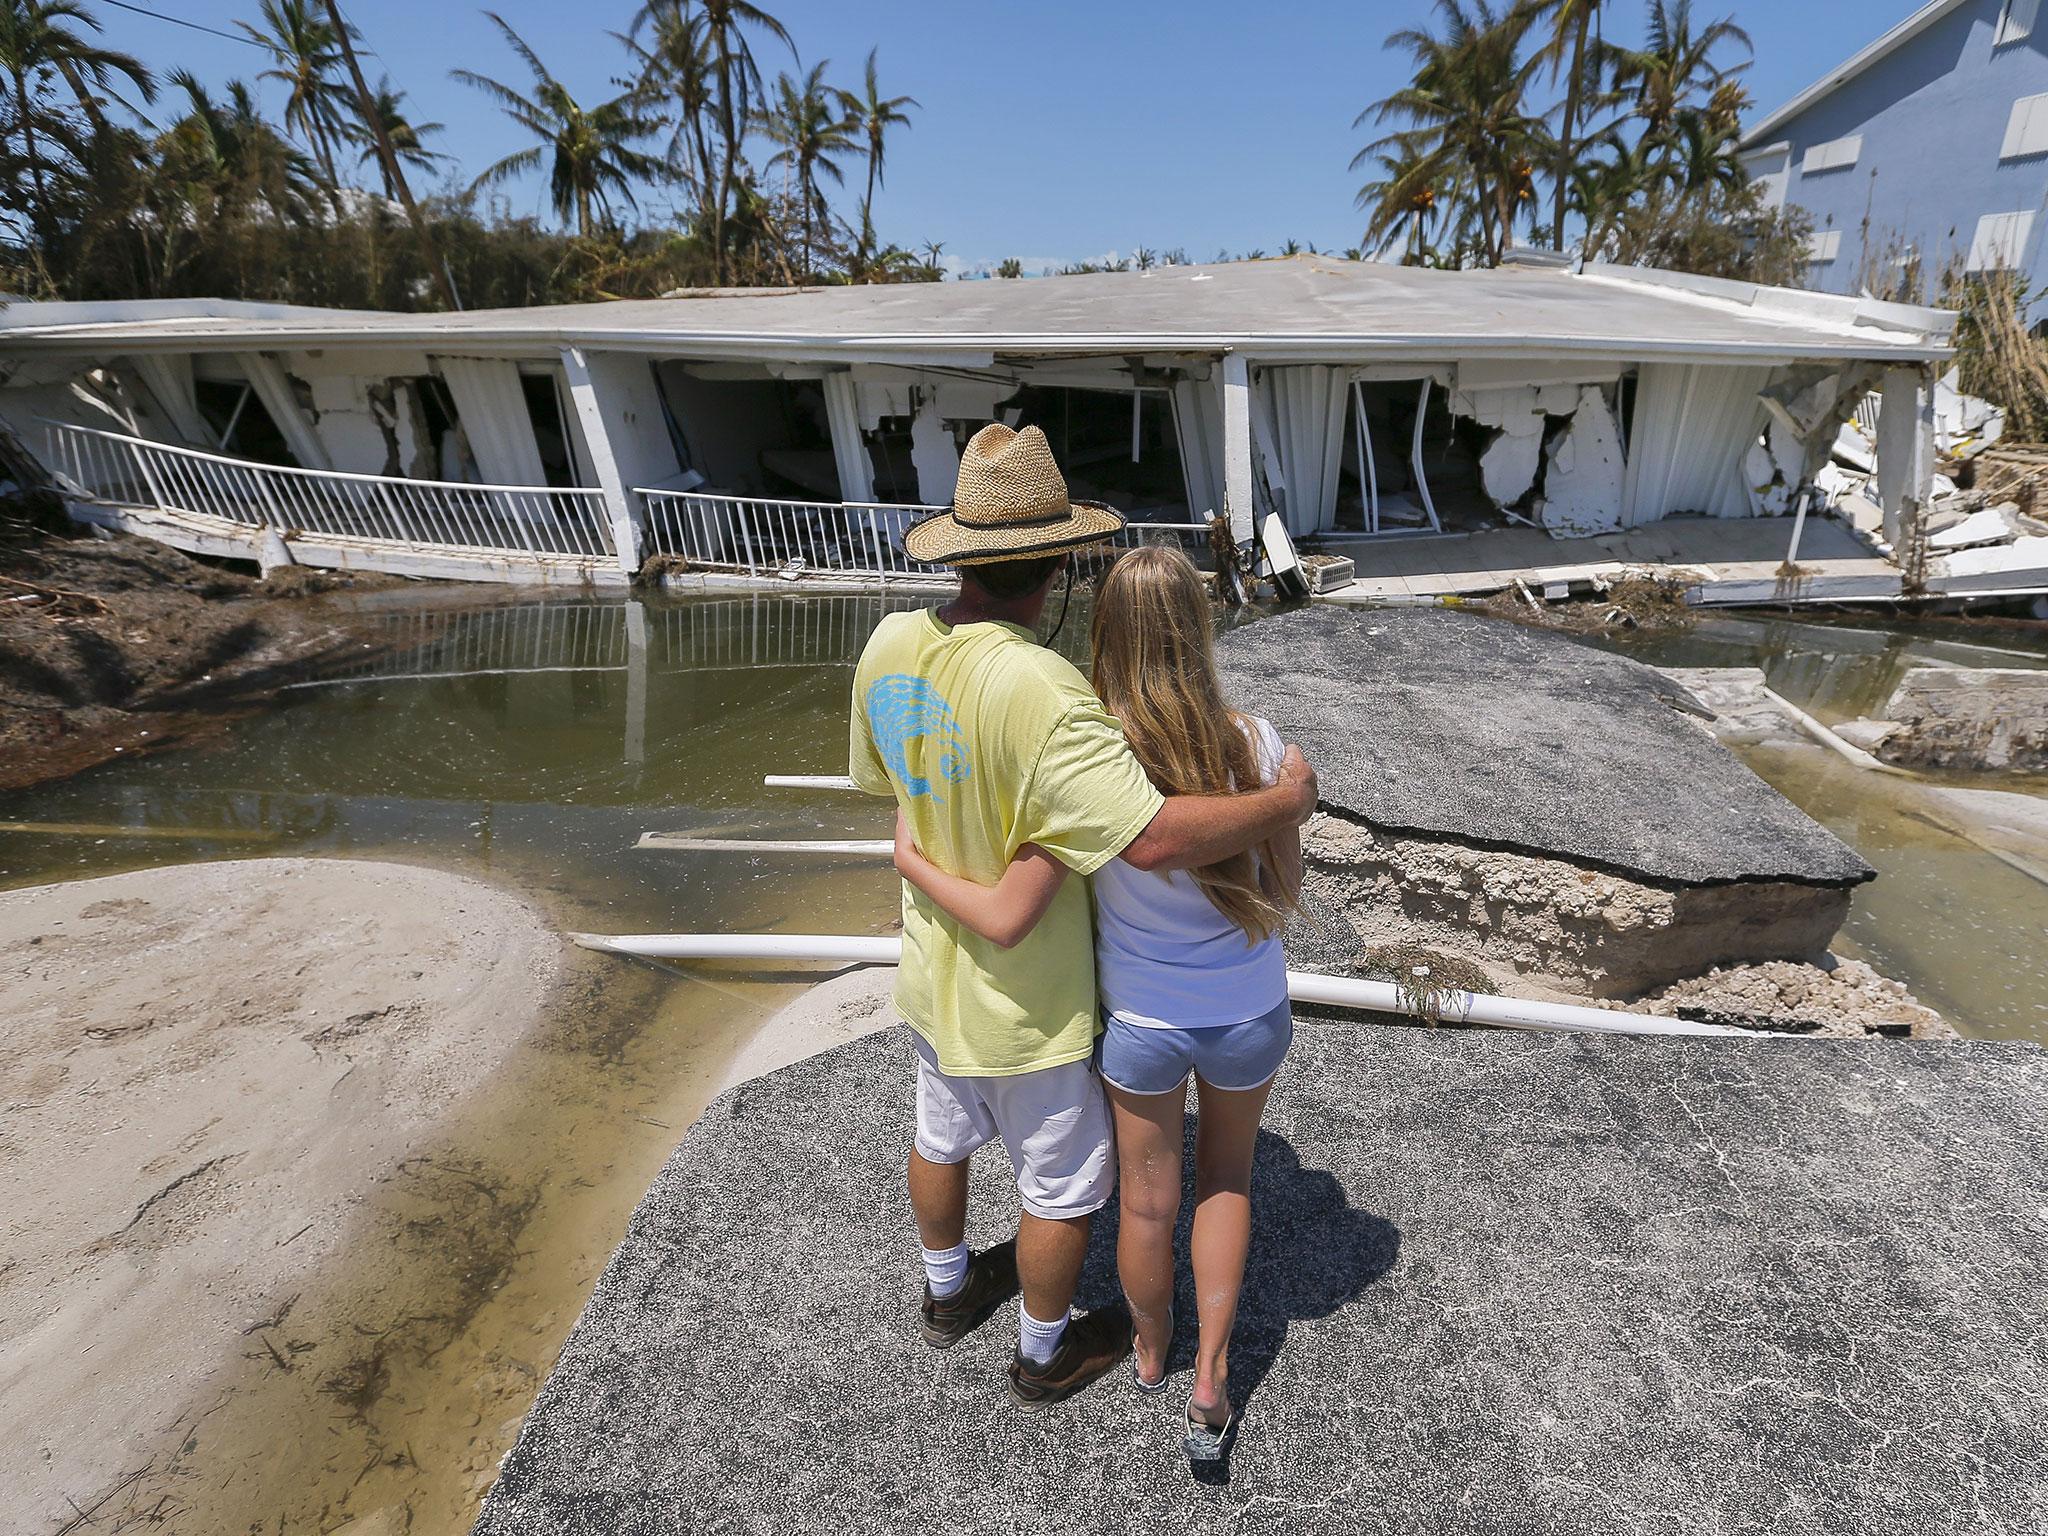 Irma destroys quarter of all Florida Keys homes, say officials | The Independent | The Independent